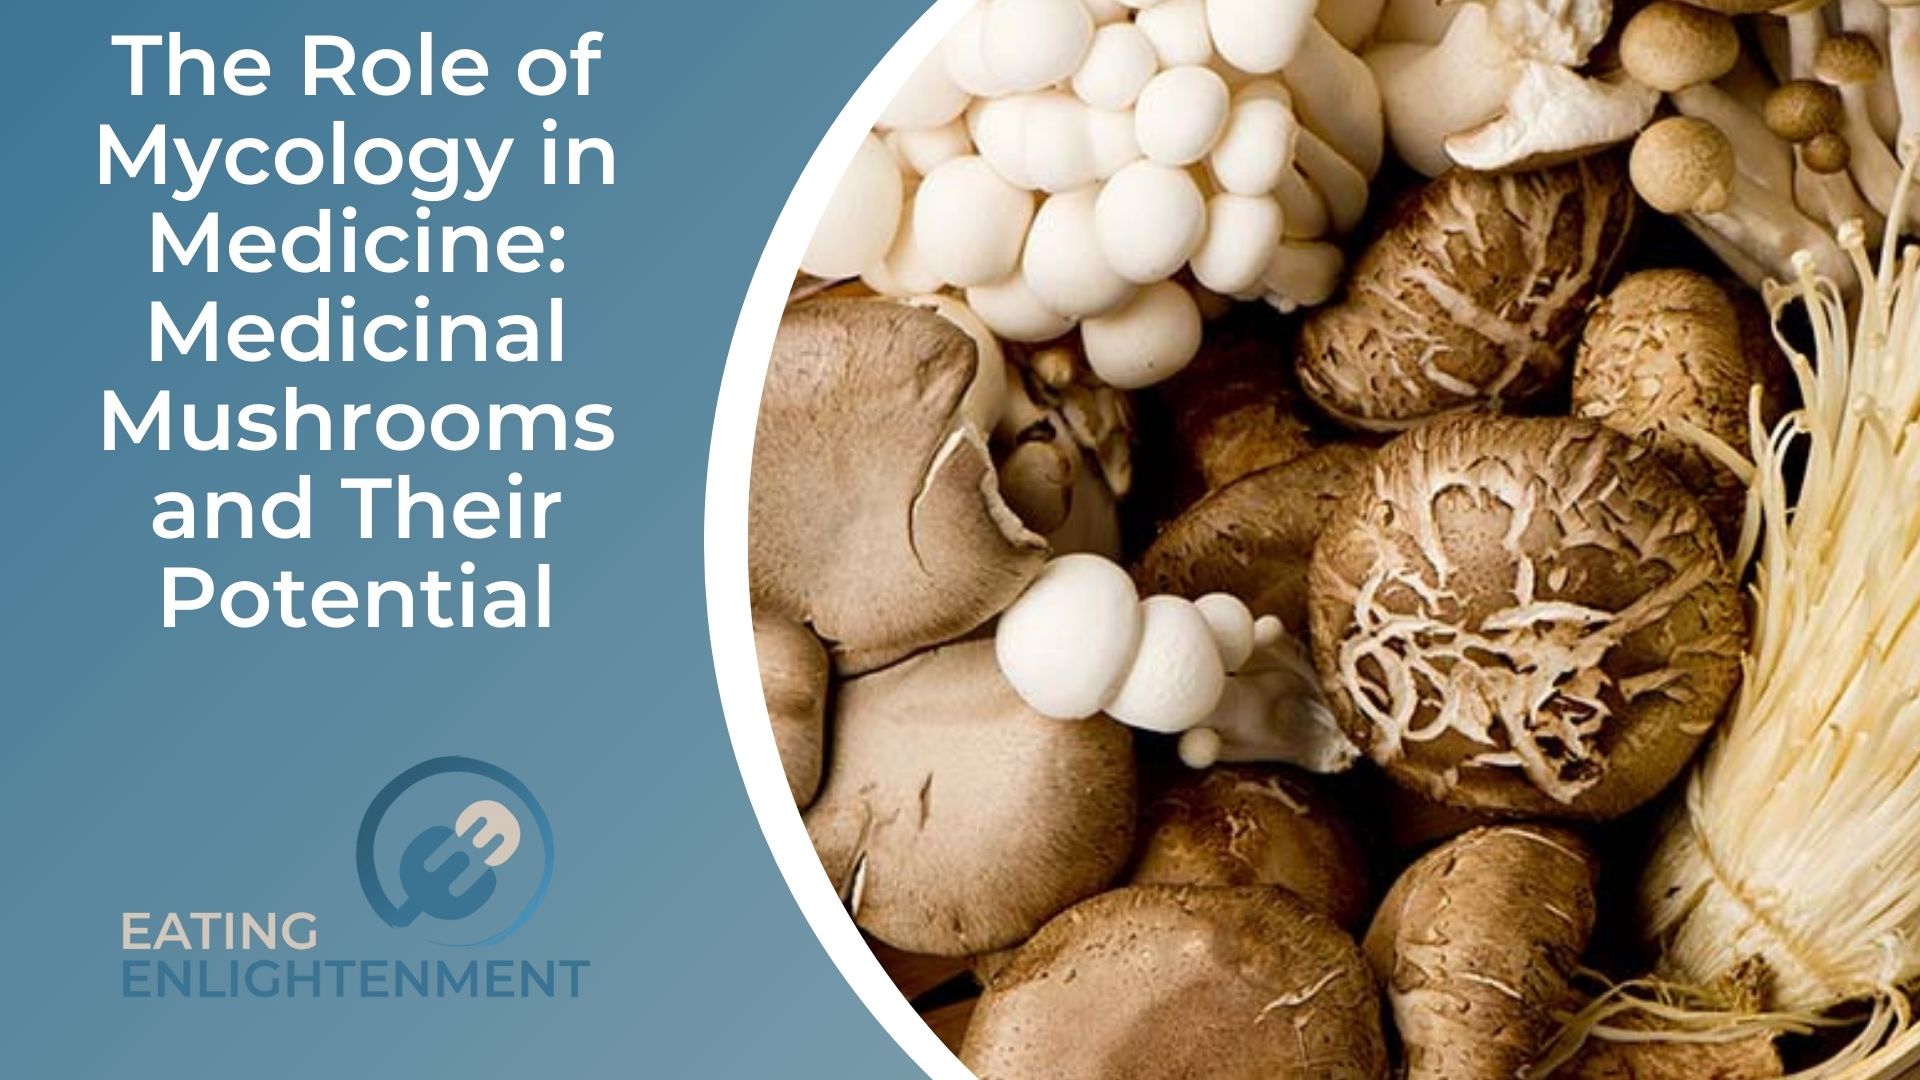 The Role of Mycology in Medicine Medicinal Mushrooms and Their Potential